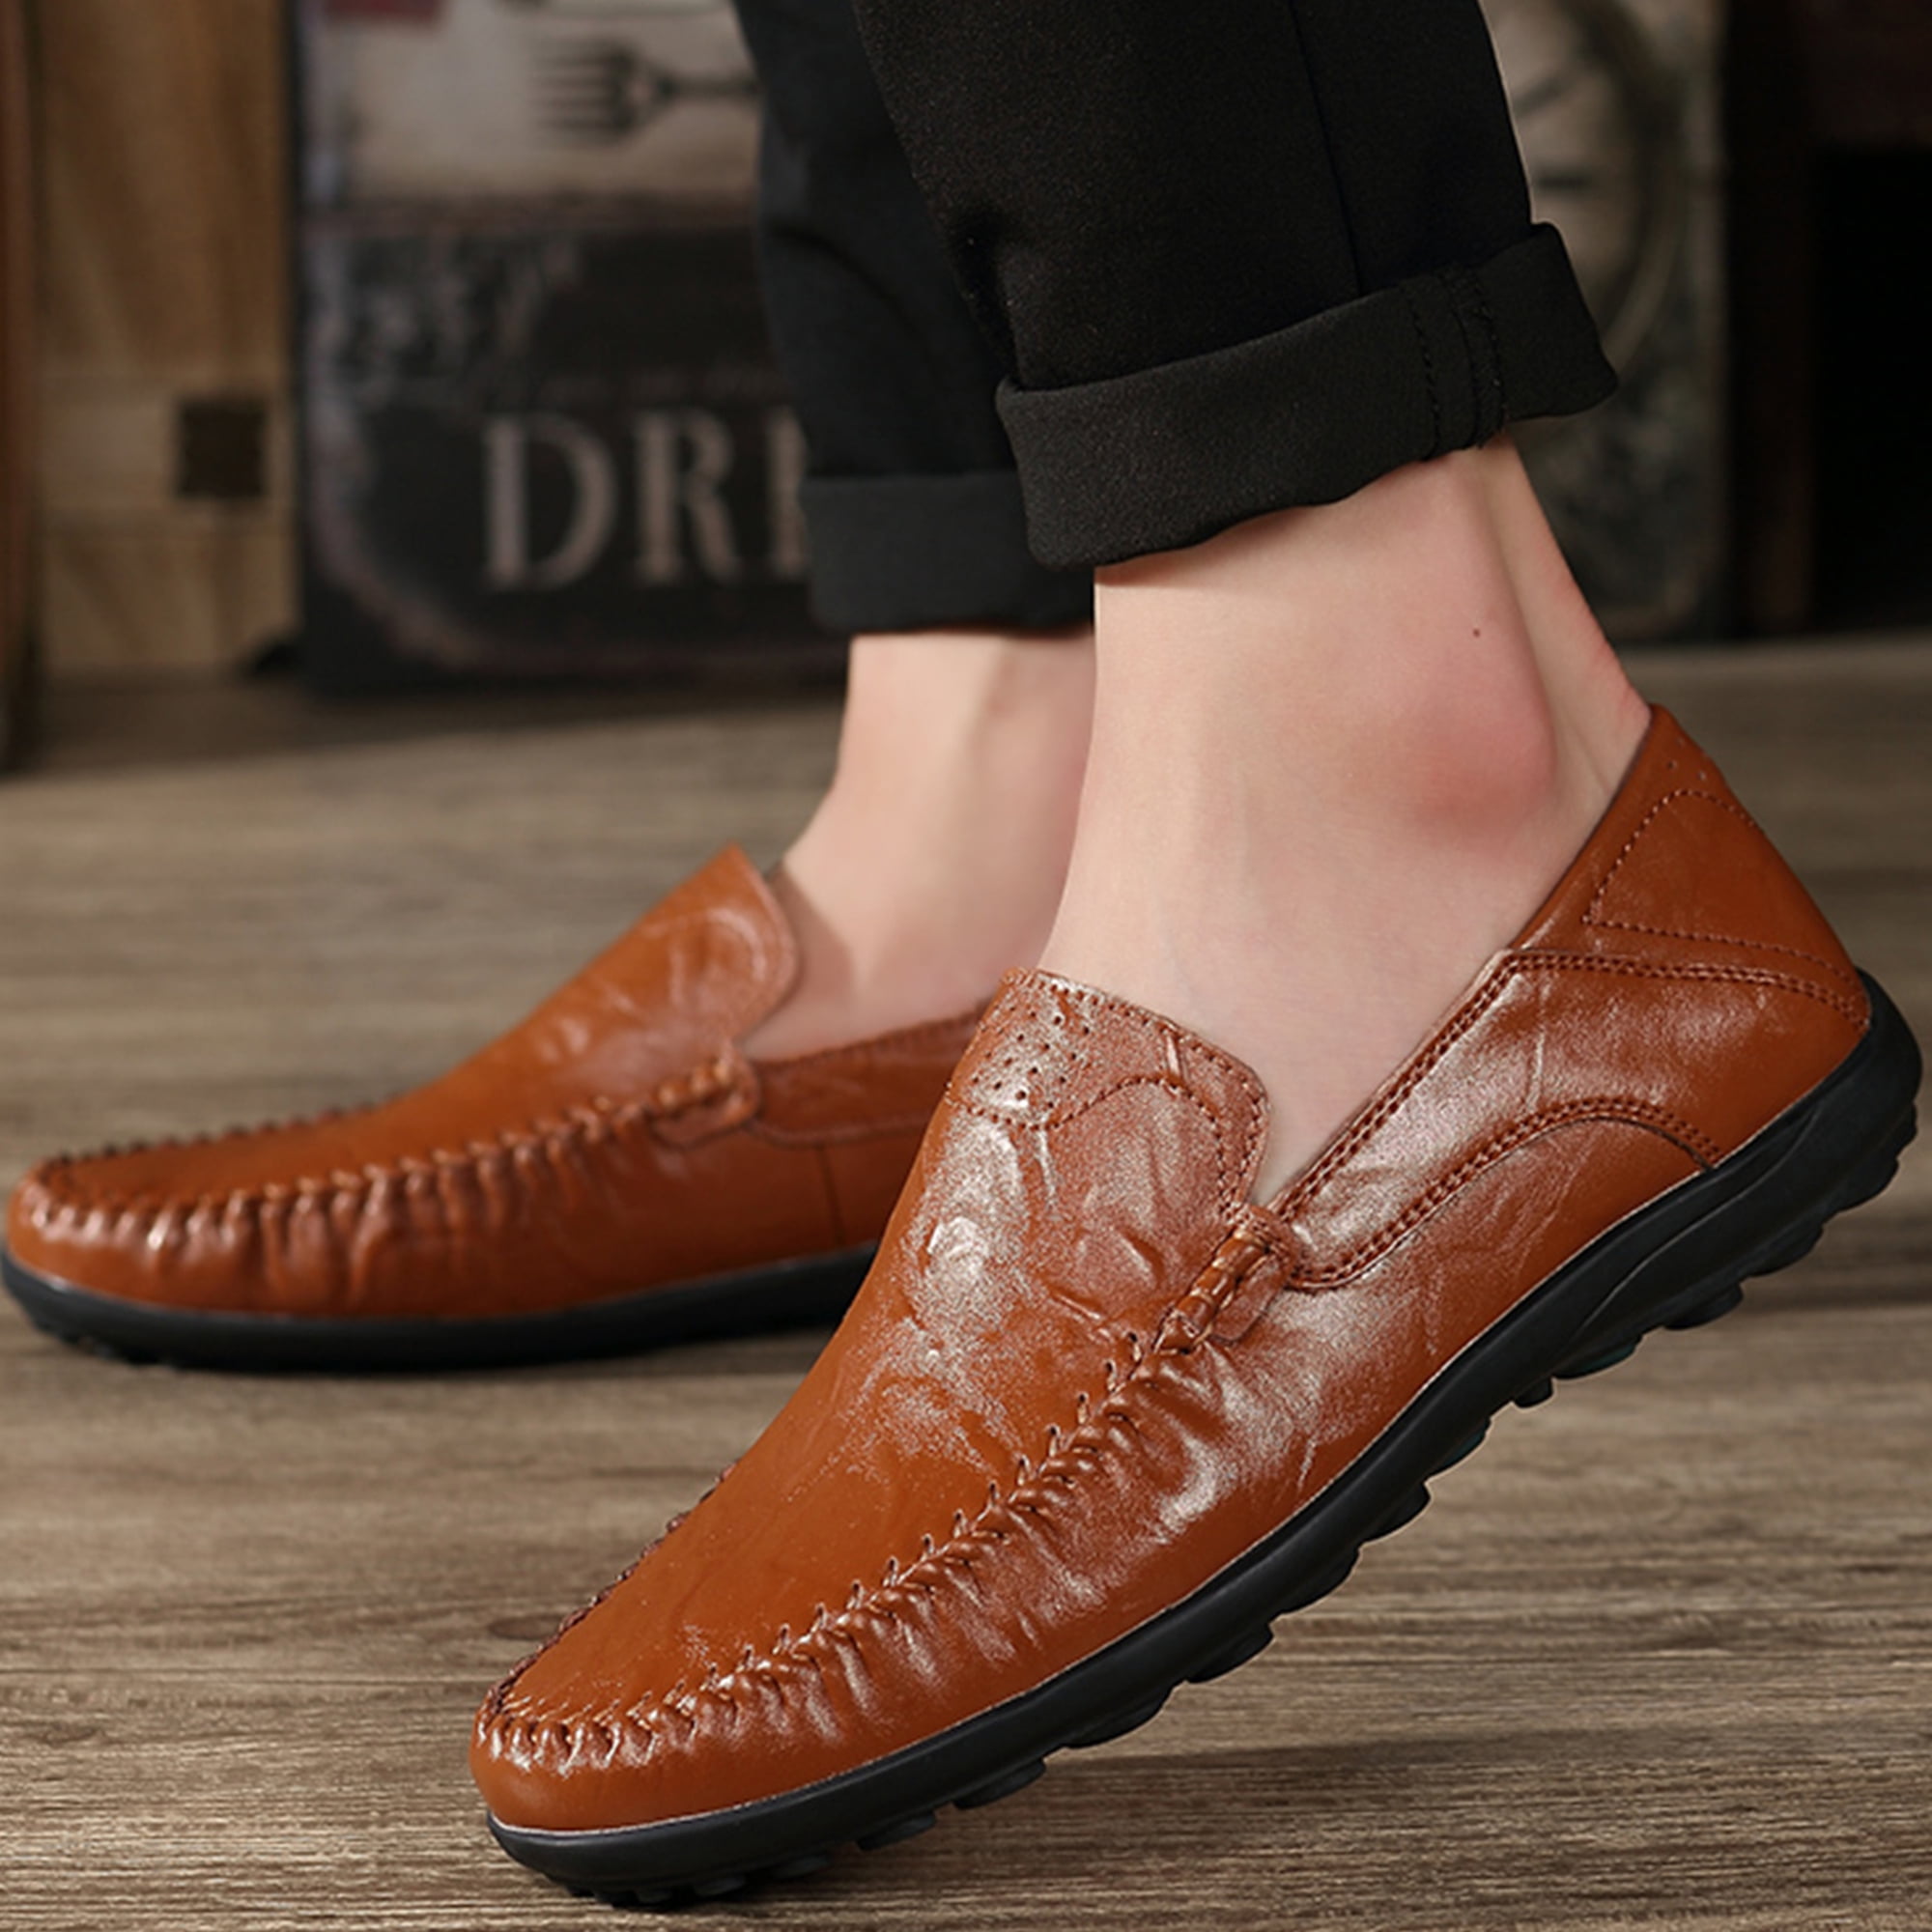 Mens Slip On Dress Shoes Business Shoes Formal Oxfords Loafers US Size 6.5-15 